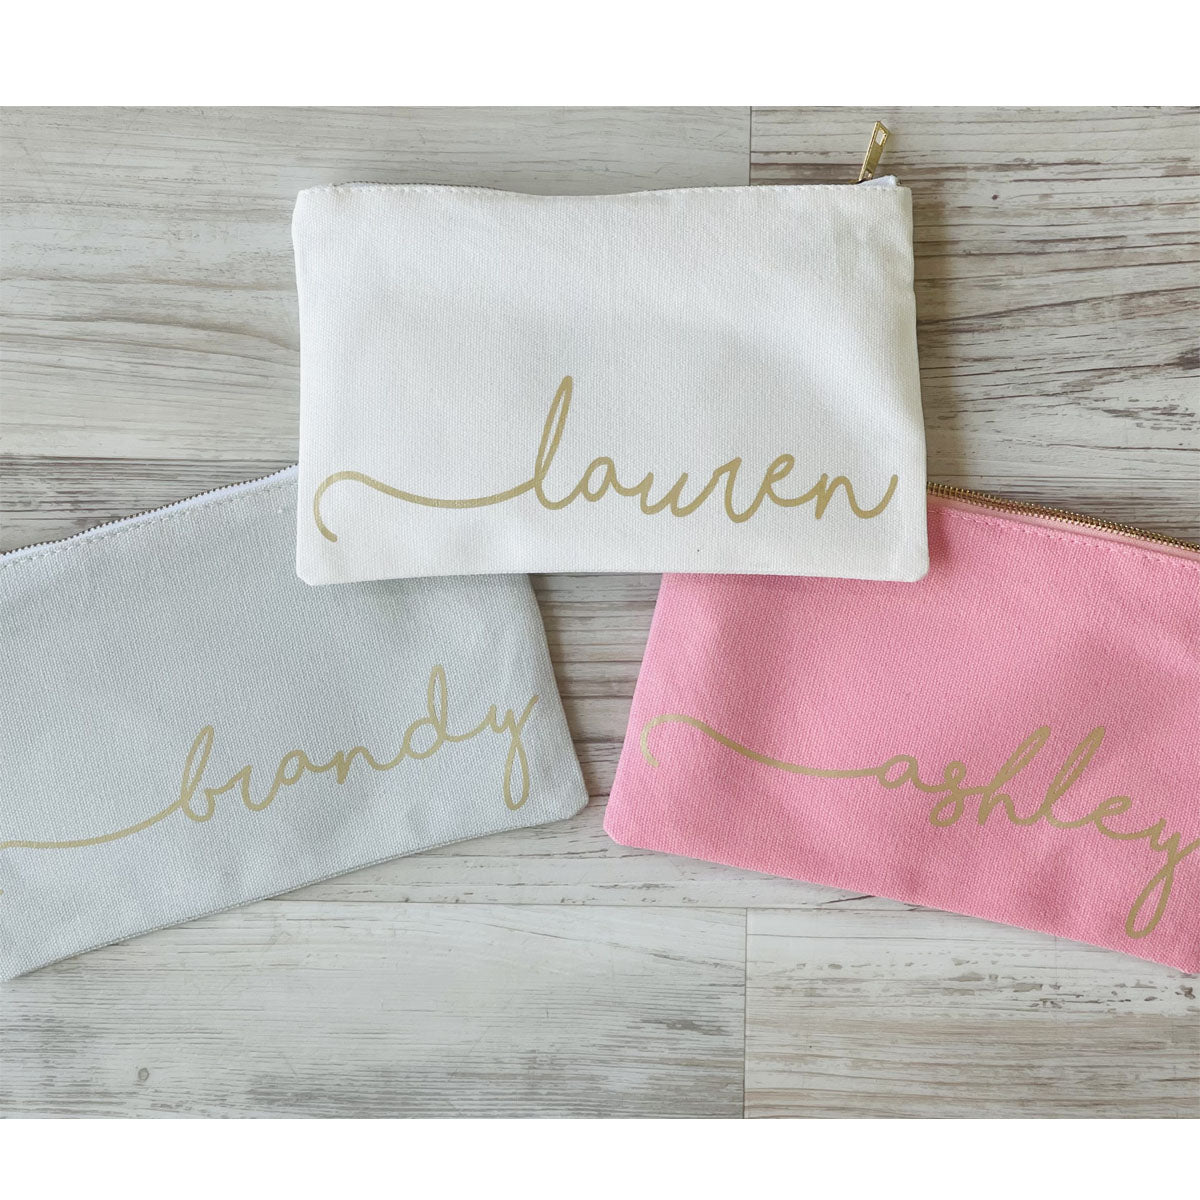 Personalized Cosmetic Bag - White - Southern Grace Creations